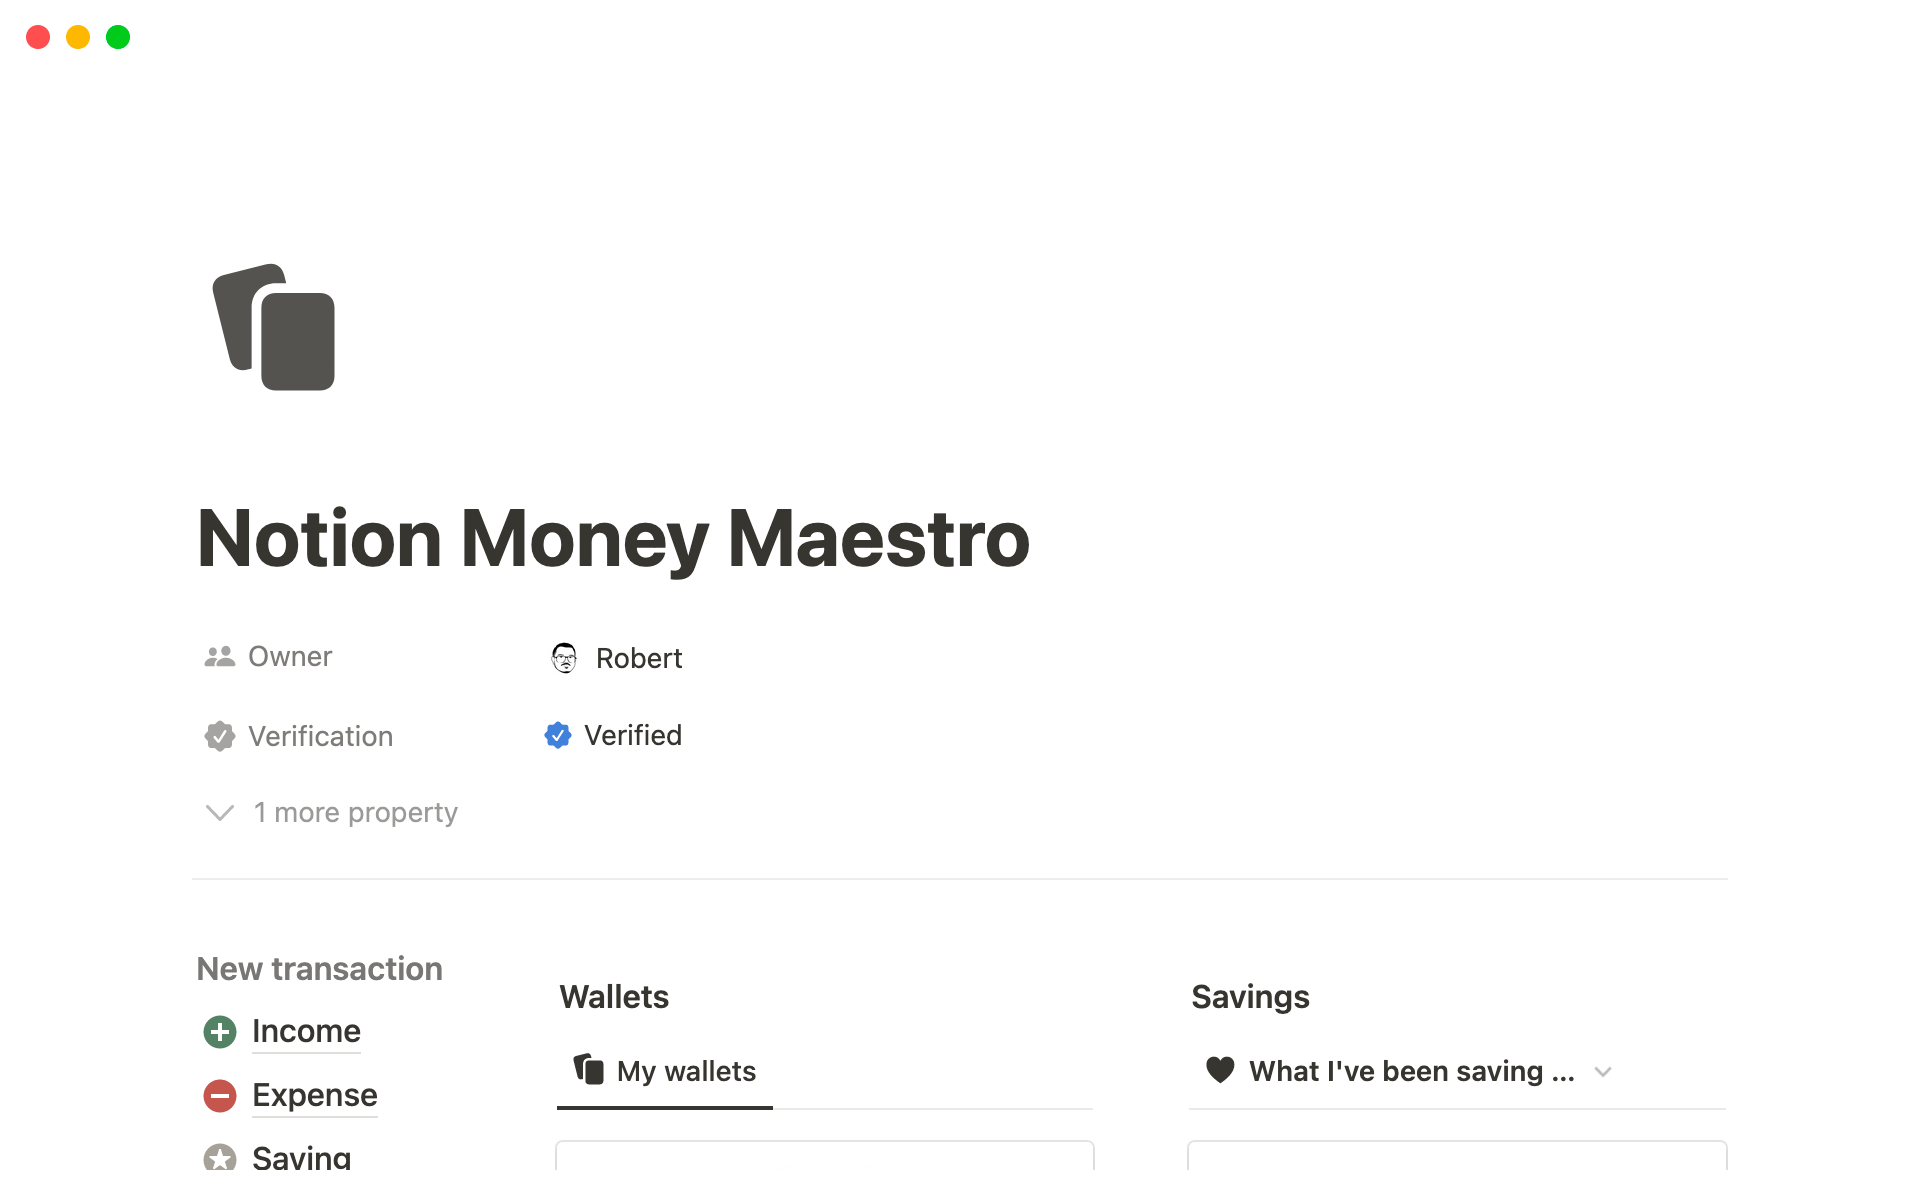 The Notion Money Maestro template is a powerful financial management tool designed to help individuals, teams, or companies take control of their finances and achieve their financial goals.